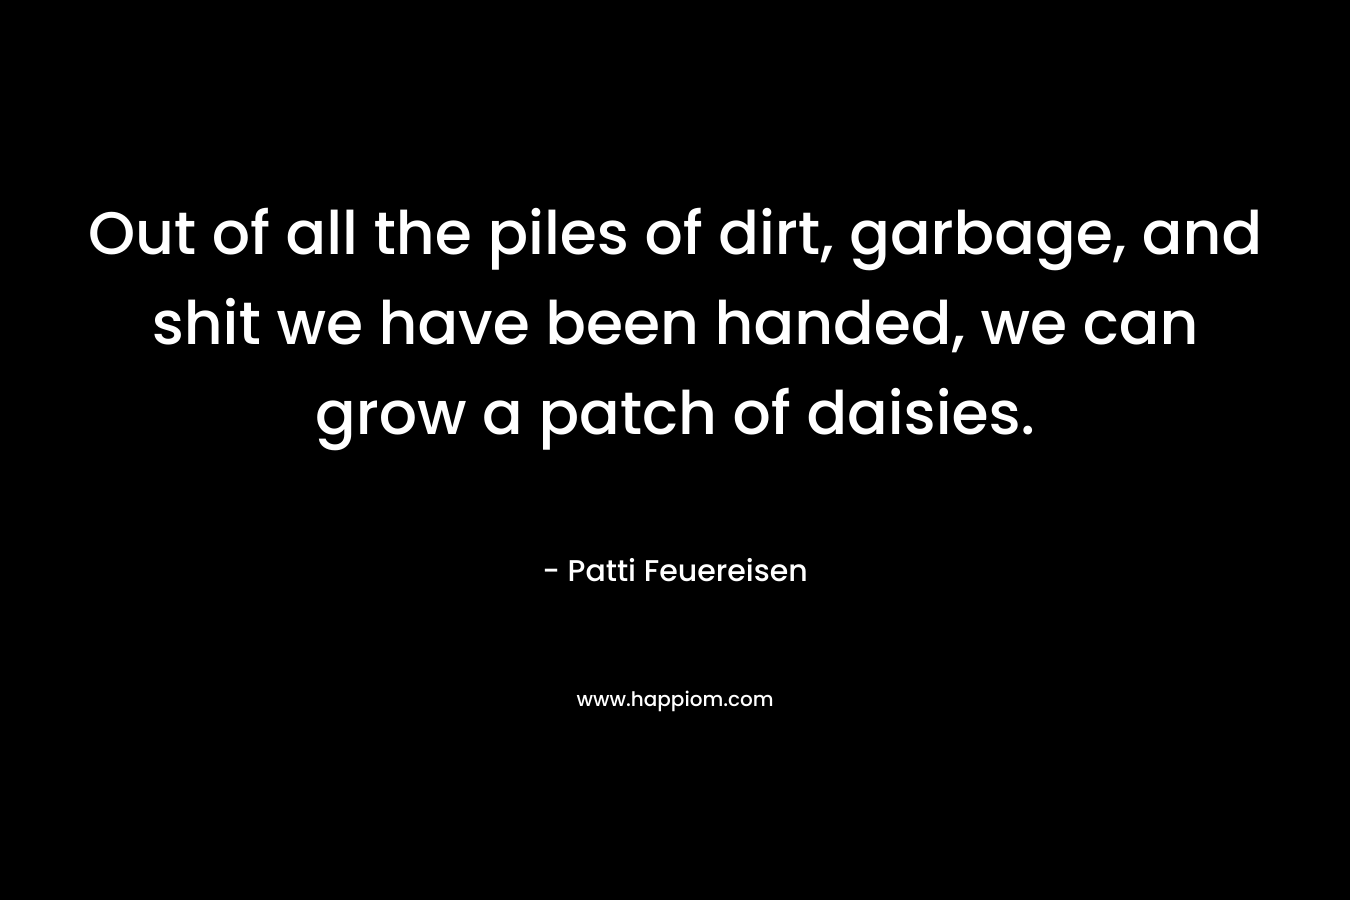 Out of all the piles of dirt, garbage, and shit we have been handed, we can grow a patch of daisies. – Patti Feuereisen